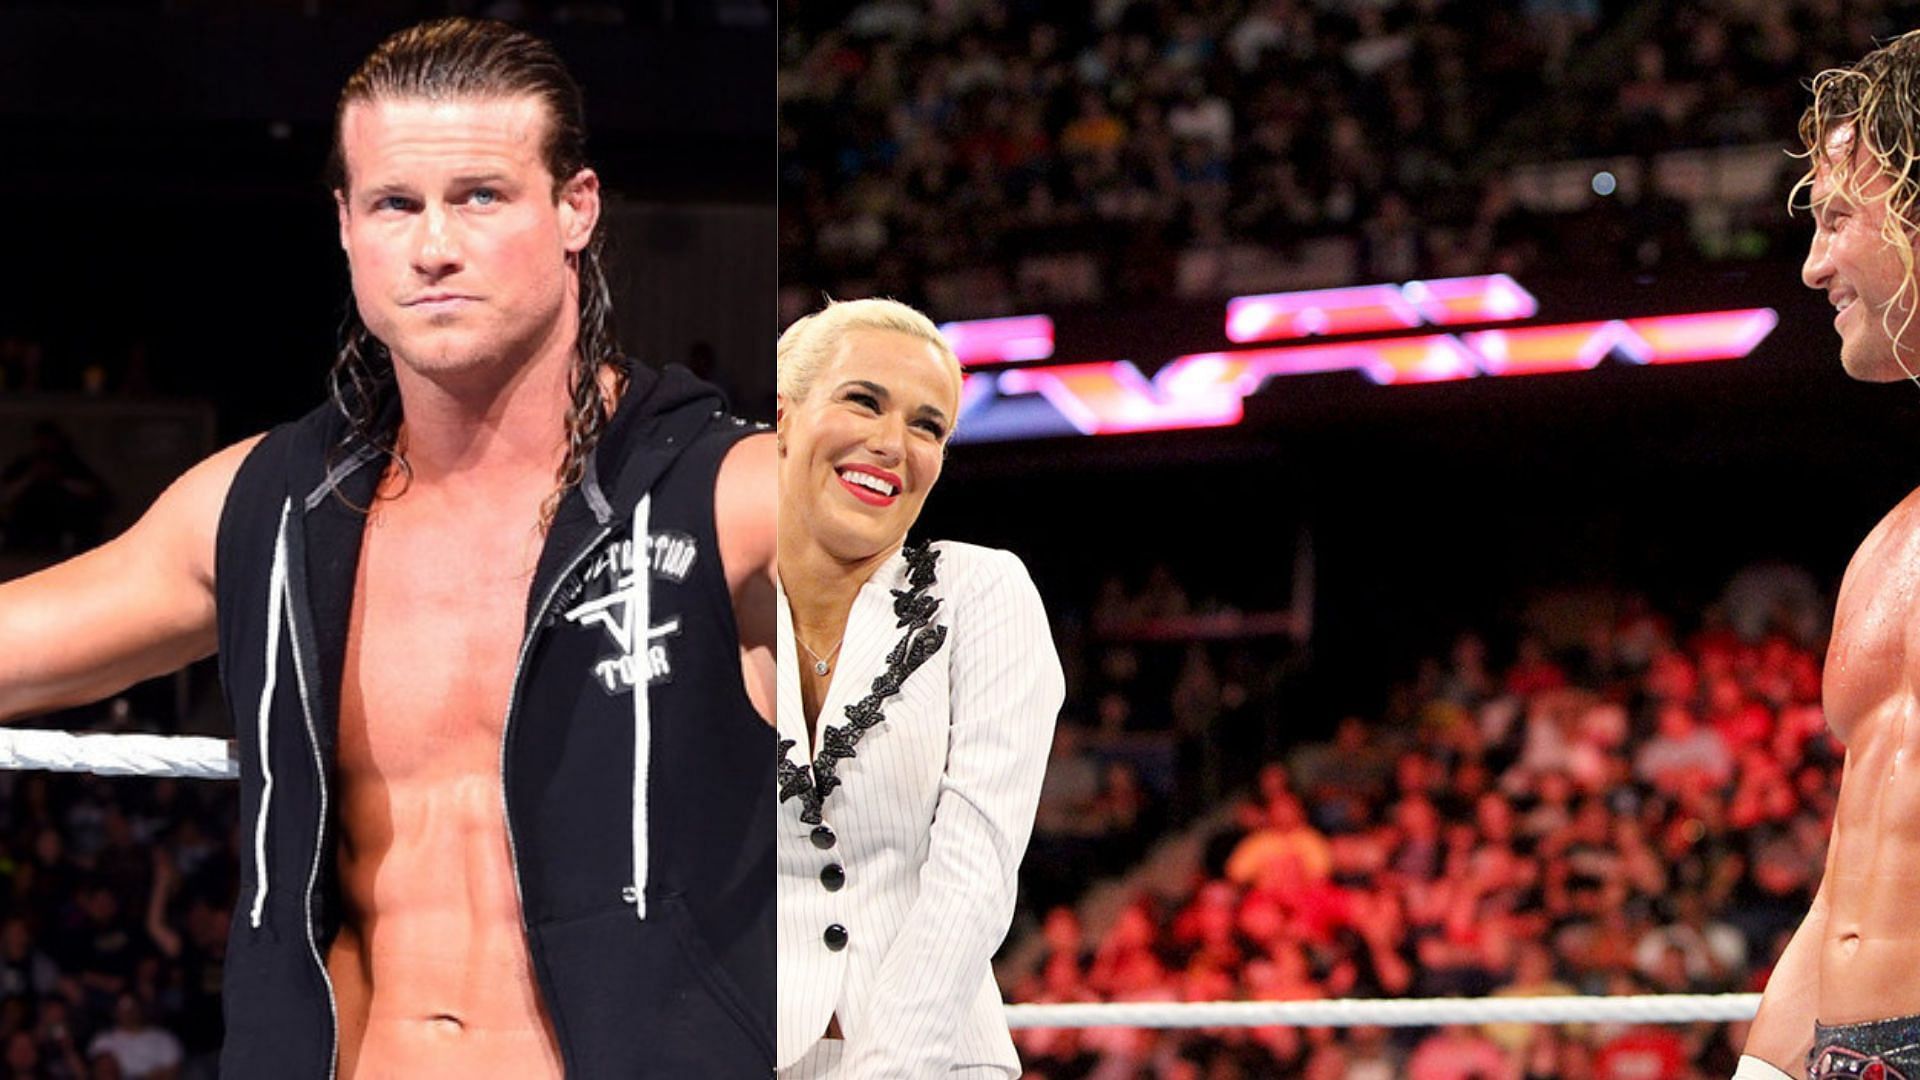 Dolph Ziggler was involved in a plethora of romantic storylines.